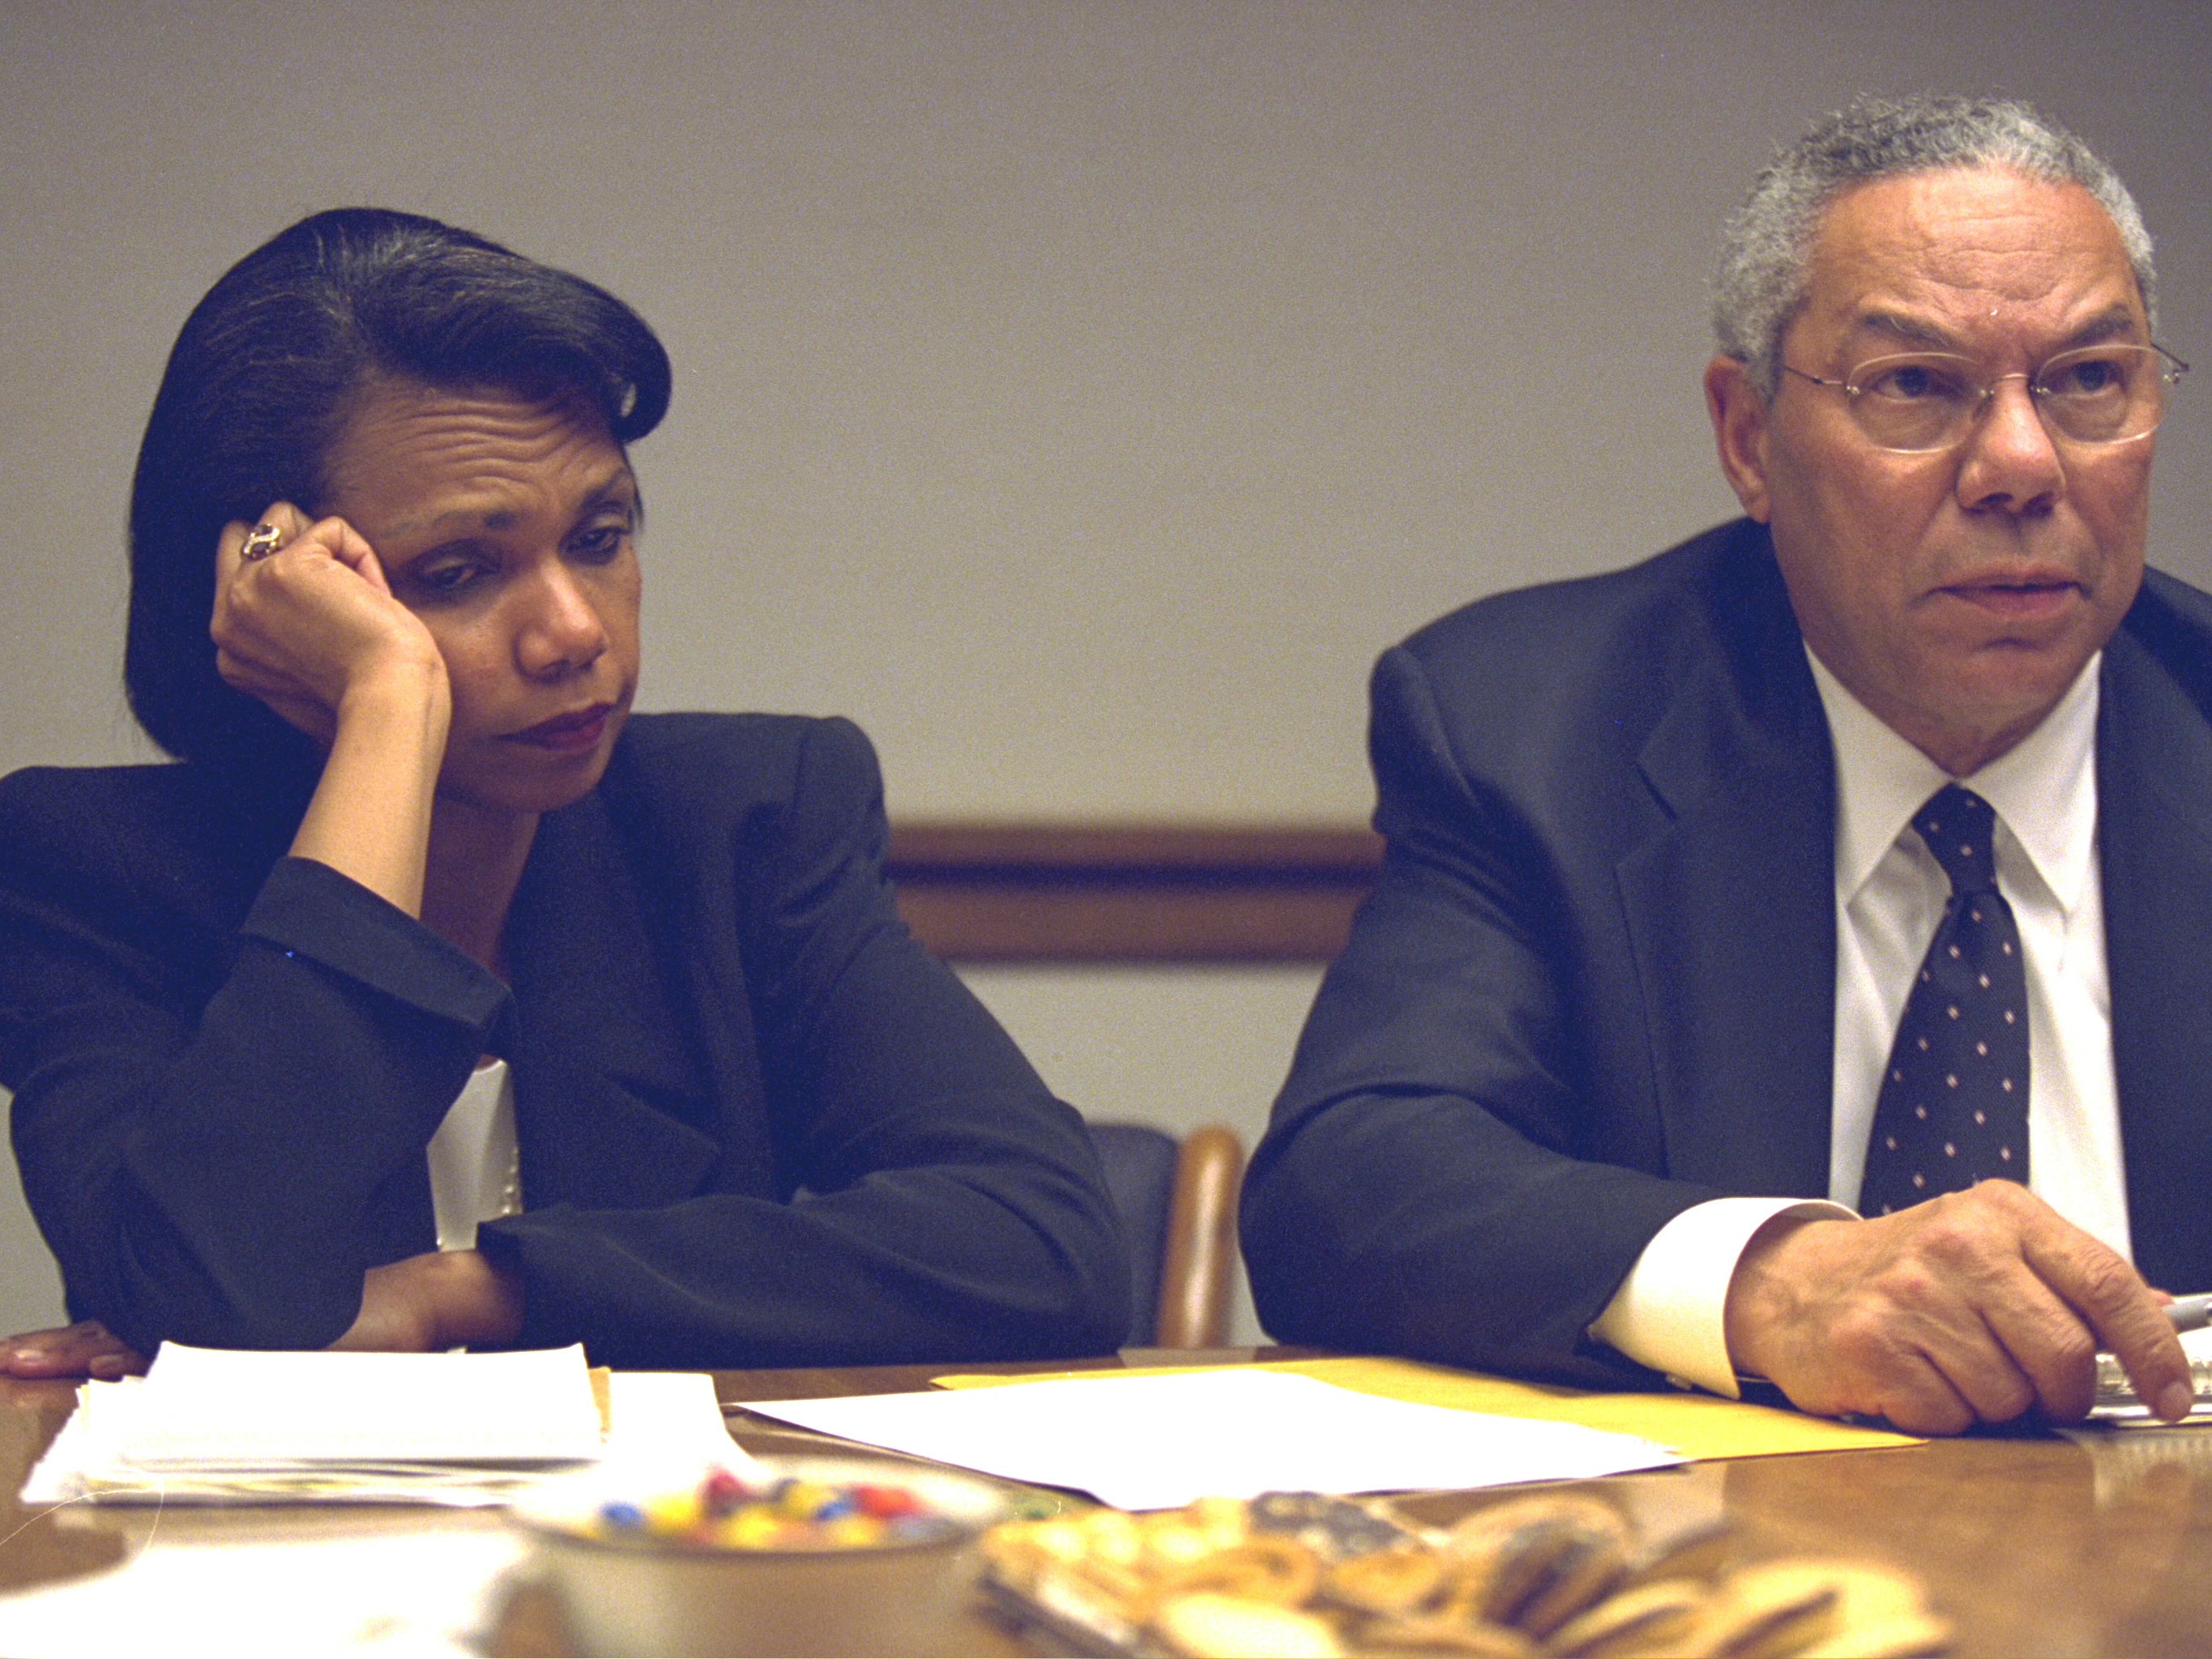 Condolezza Rice looks dismayed next to Colin Powell during crisis talks in the White House emergency bunker